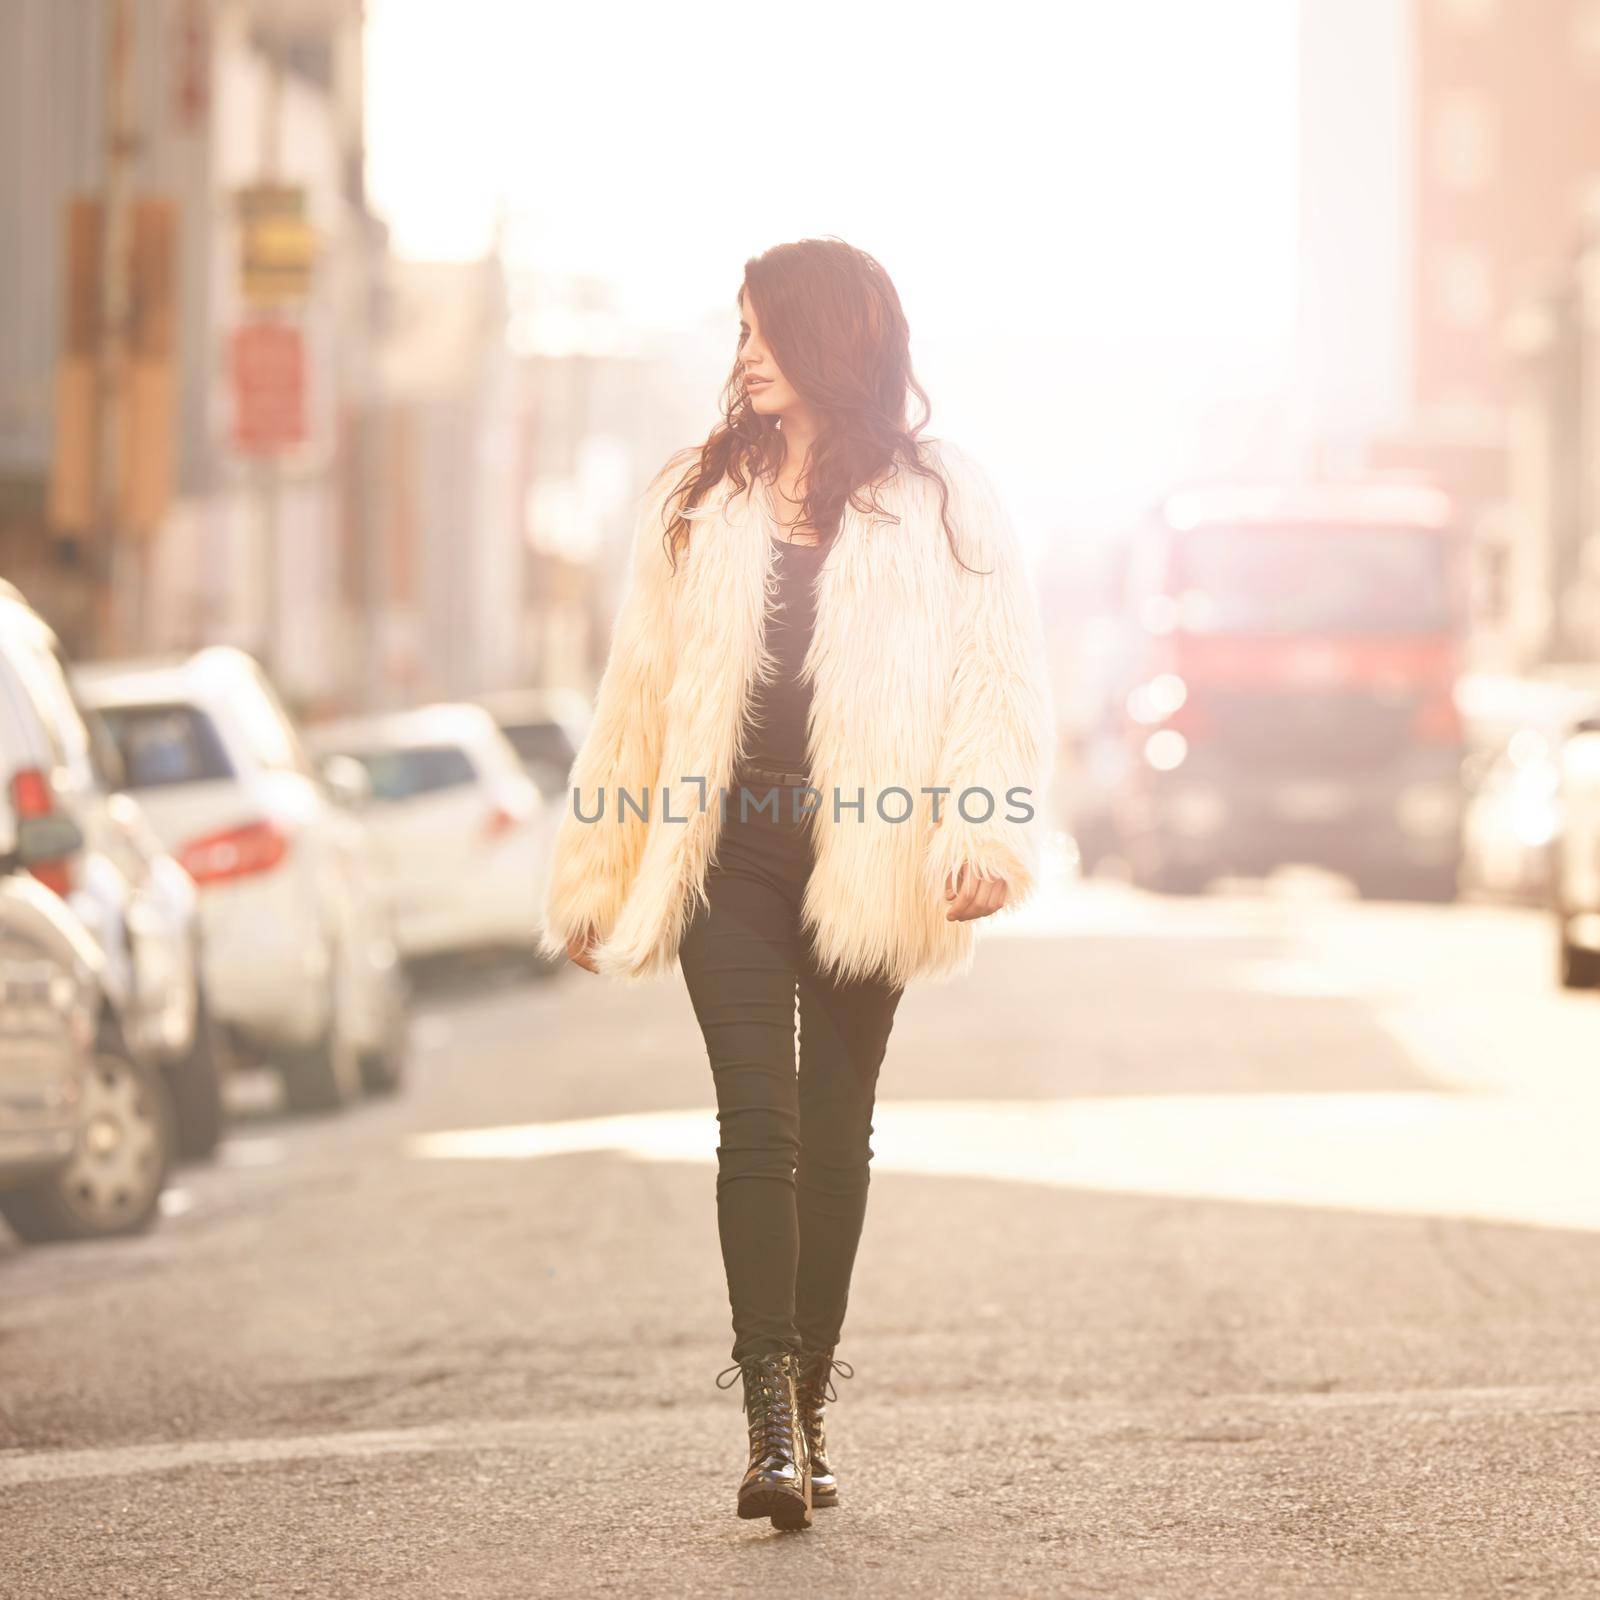 The road is her runway. an attractive young woman out and about in the city. by YuriArcurs